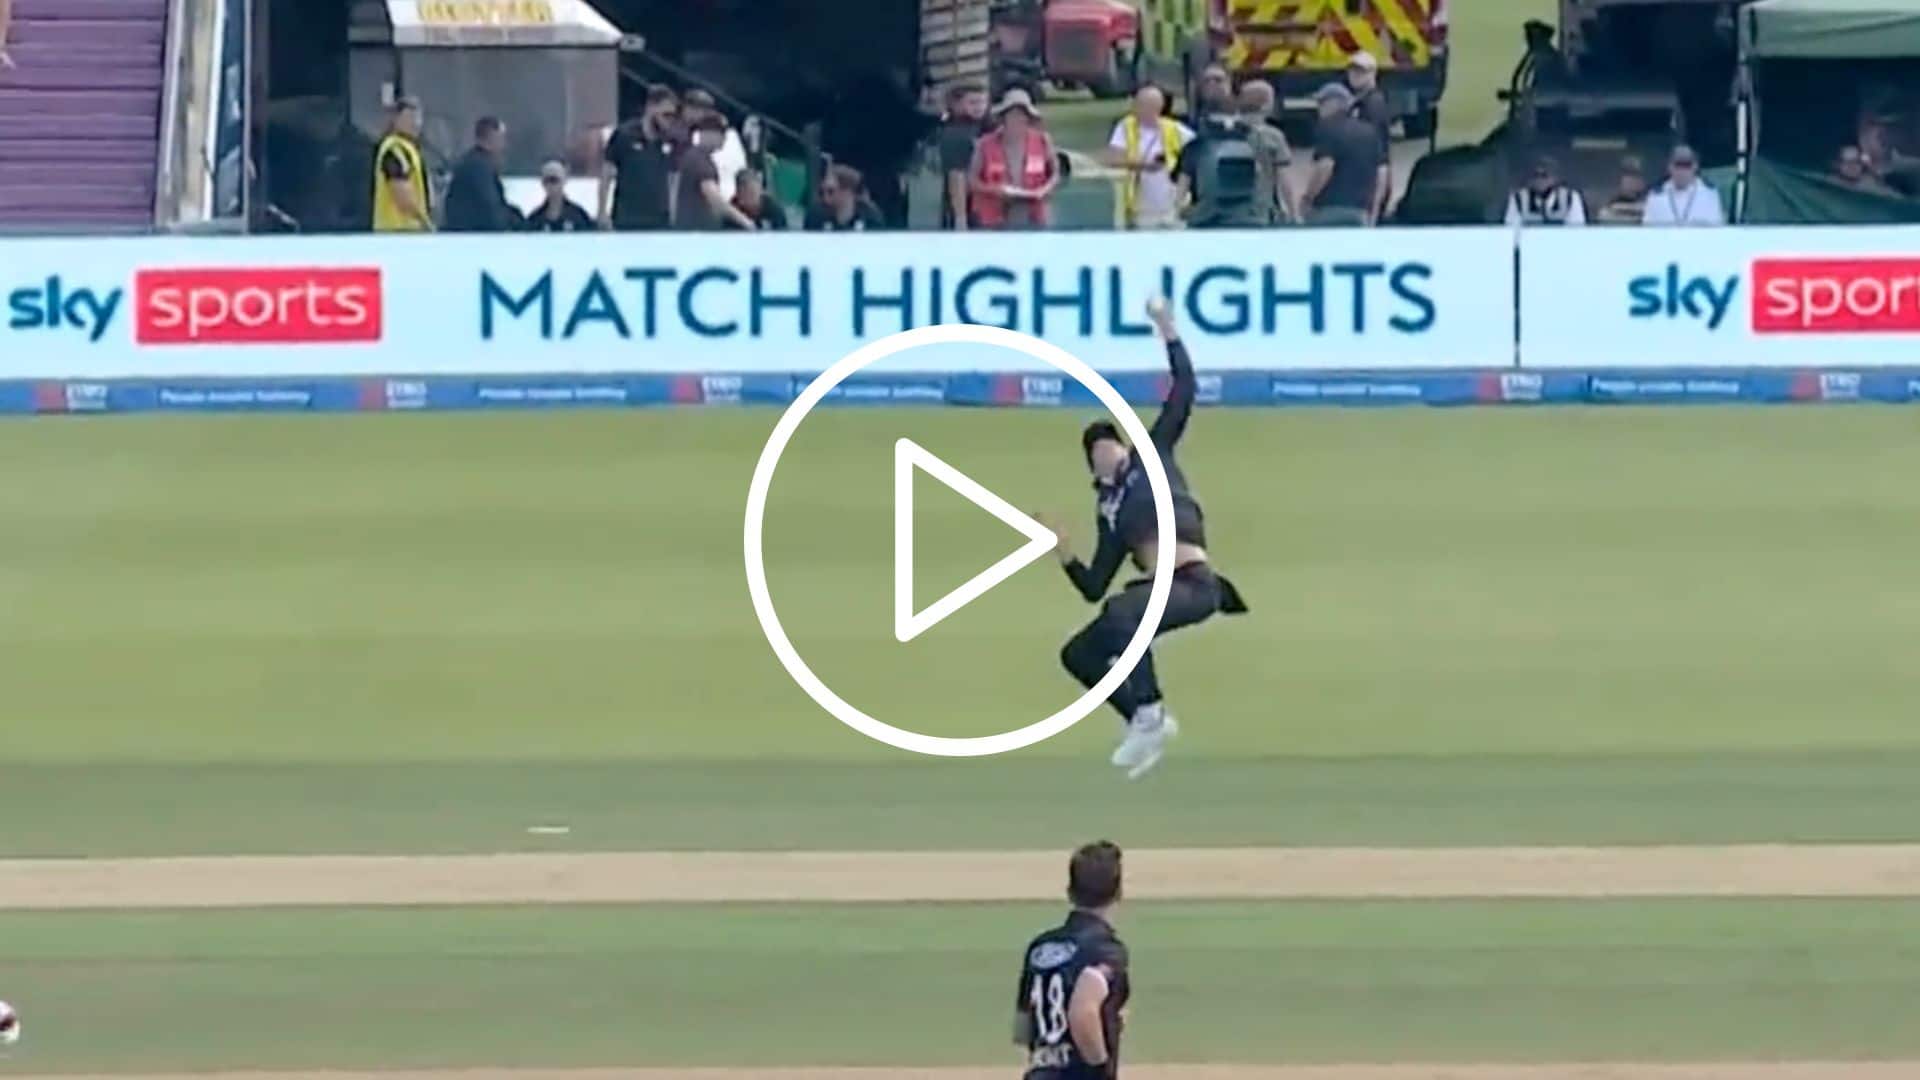 [Watch] Mitchell Santner’s One-Handed Leap Leaves Jonny Bairstow Stunned